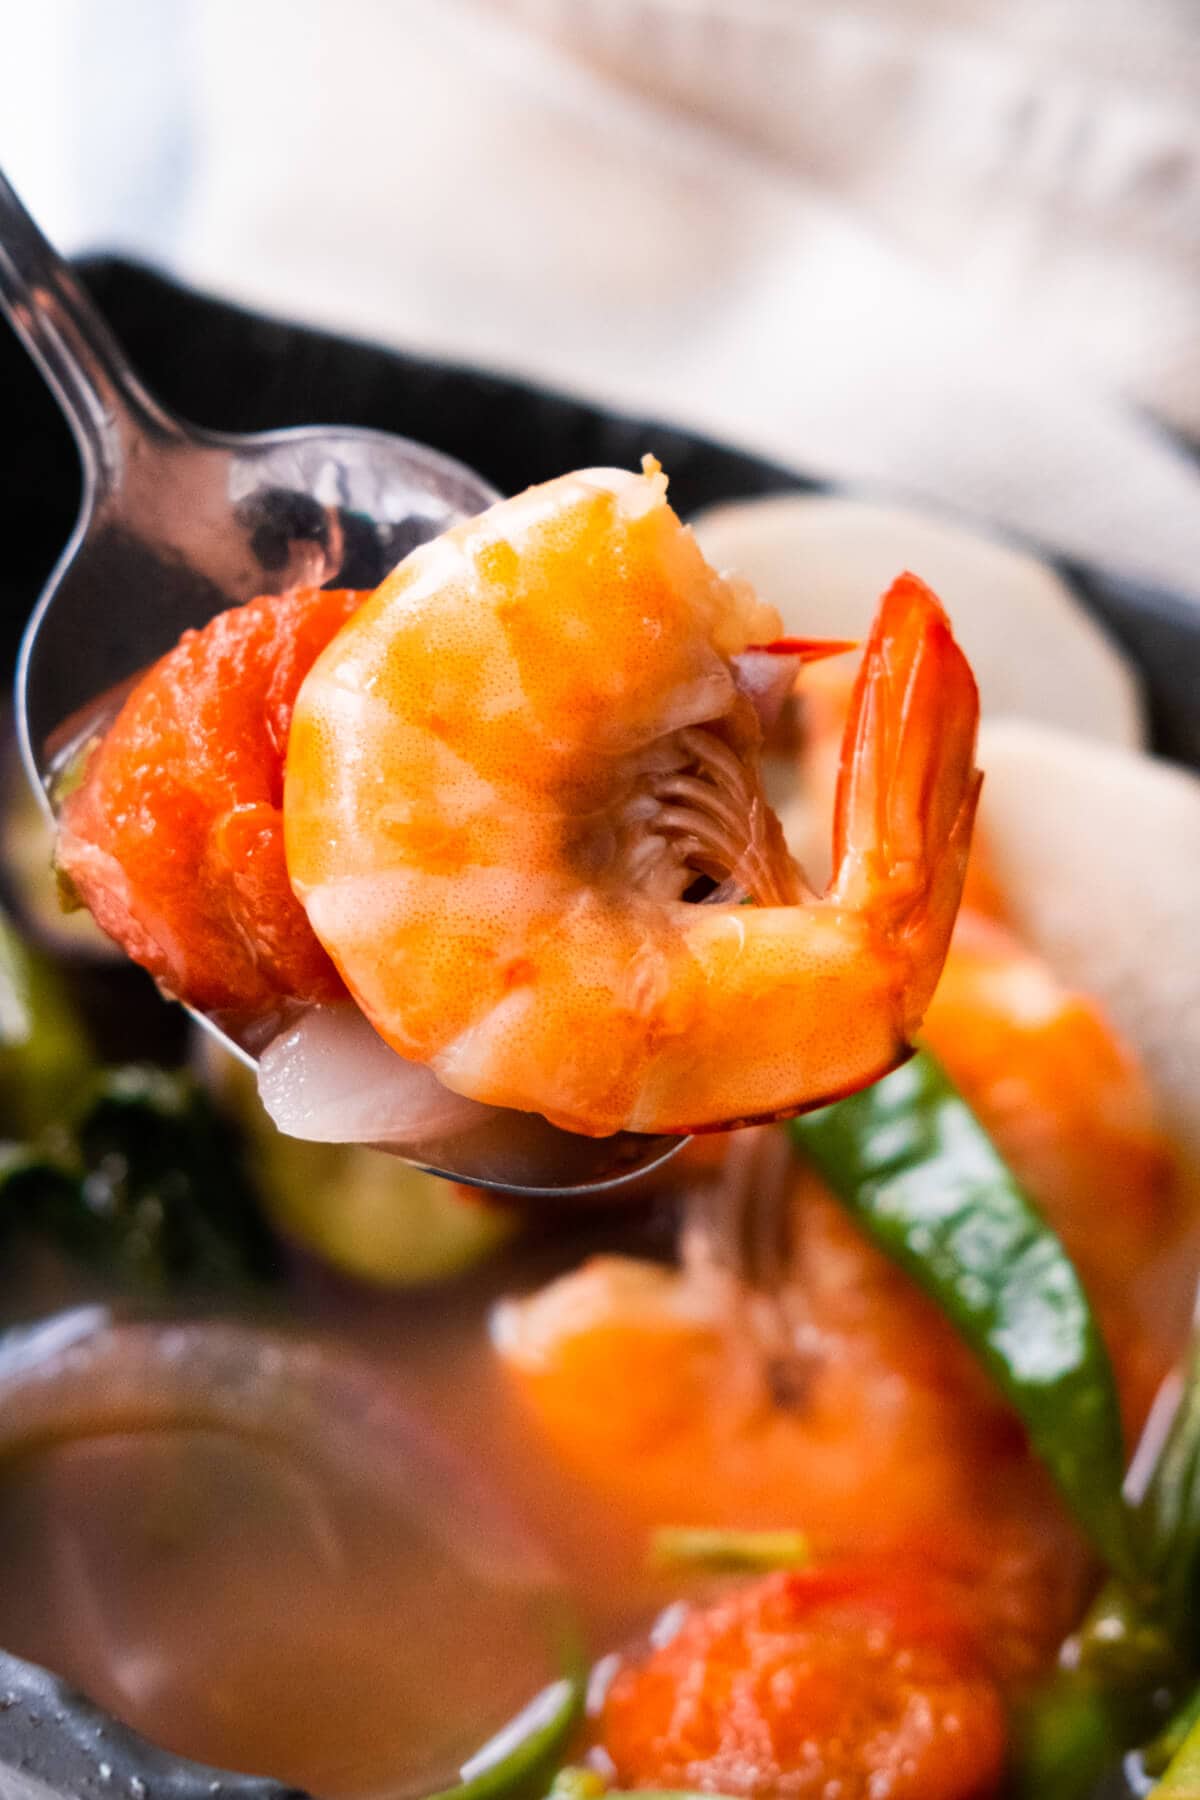 Shrimp and tomato are scooped with a spoon from this delicious shrimp sinigang stew.